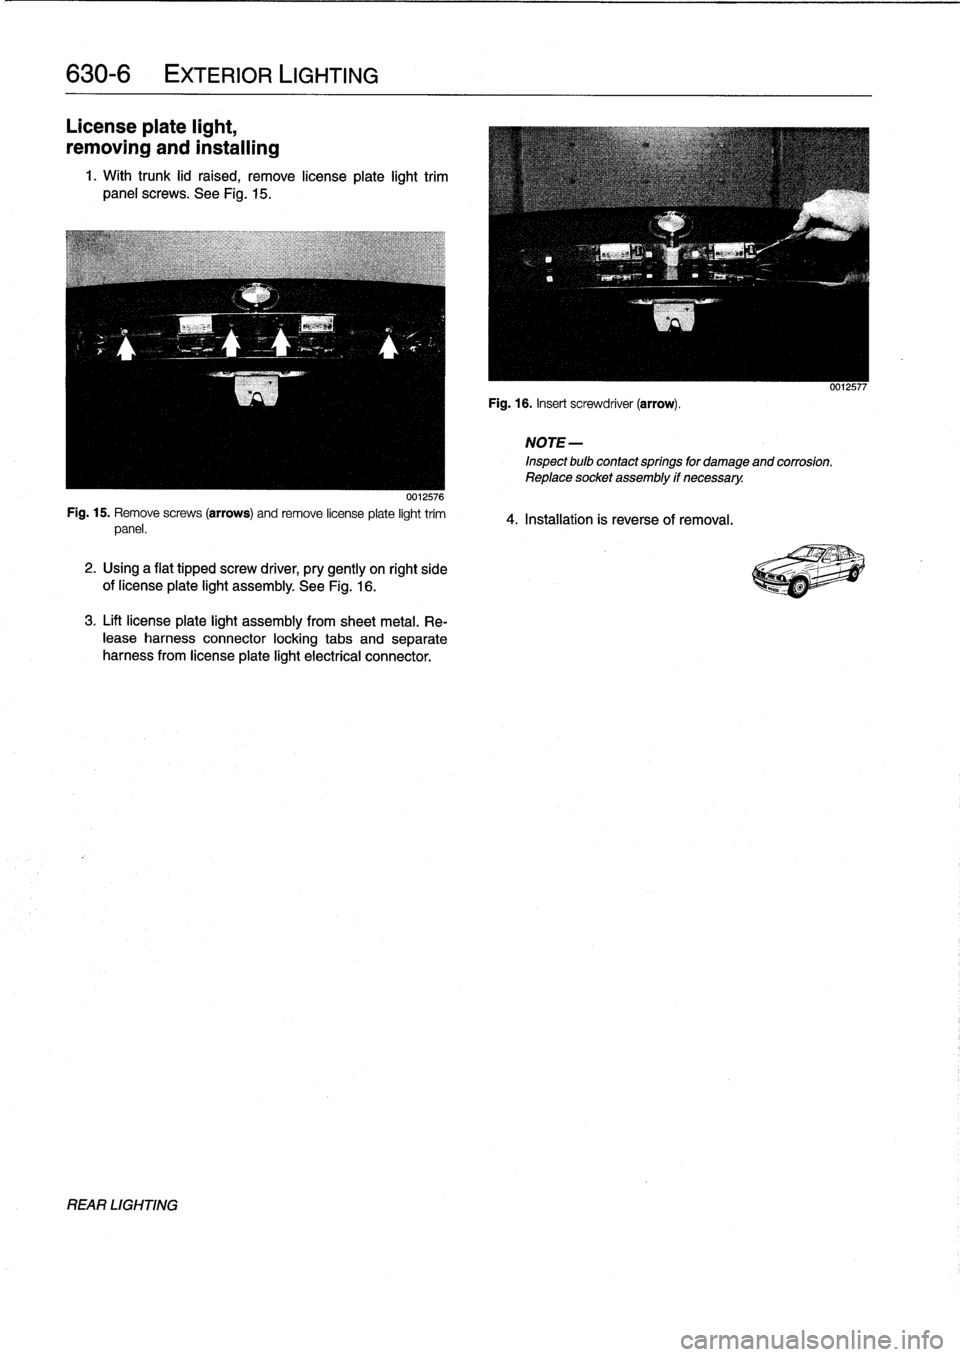 BMW 328i 1994 E36 Owners Manual 
630-
6

	

EXTERIOR
LIGHTING

License
plate
light,

removing
and
installing

1
.
With
trunk
lid
raised,
remove
lícense
plate
light
trim
panel
screws
.
See
Fig
.
15
.

0012576
Fig
.
15
.
Remove
screw